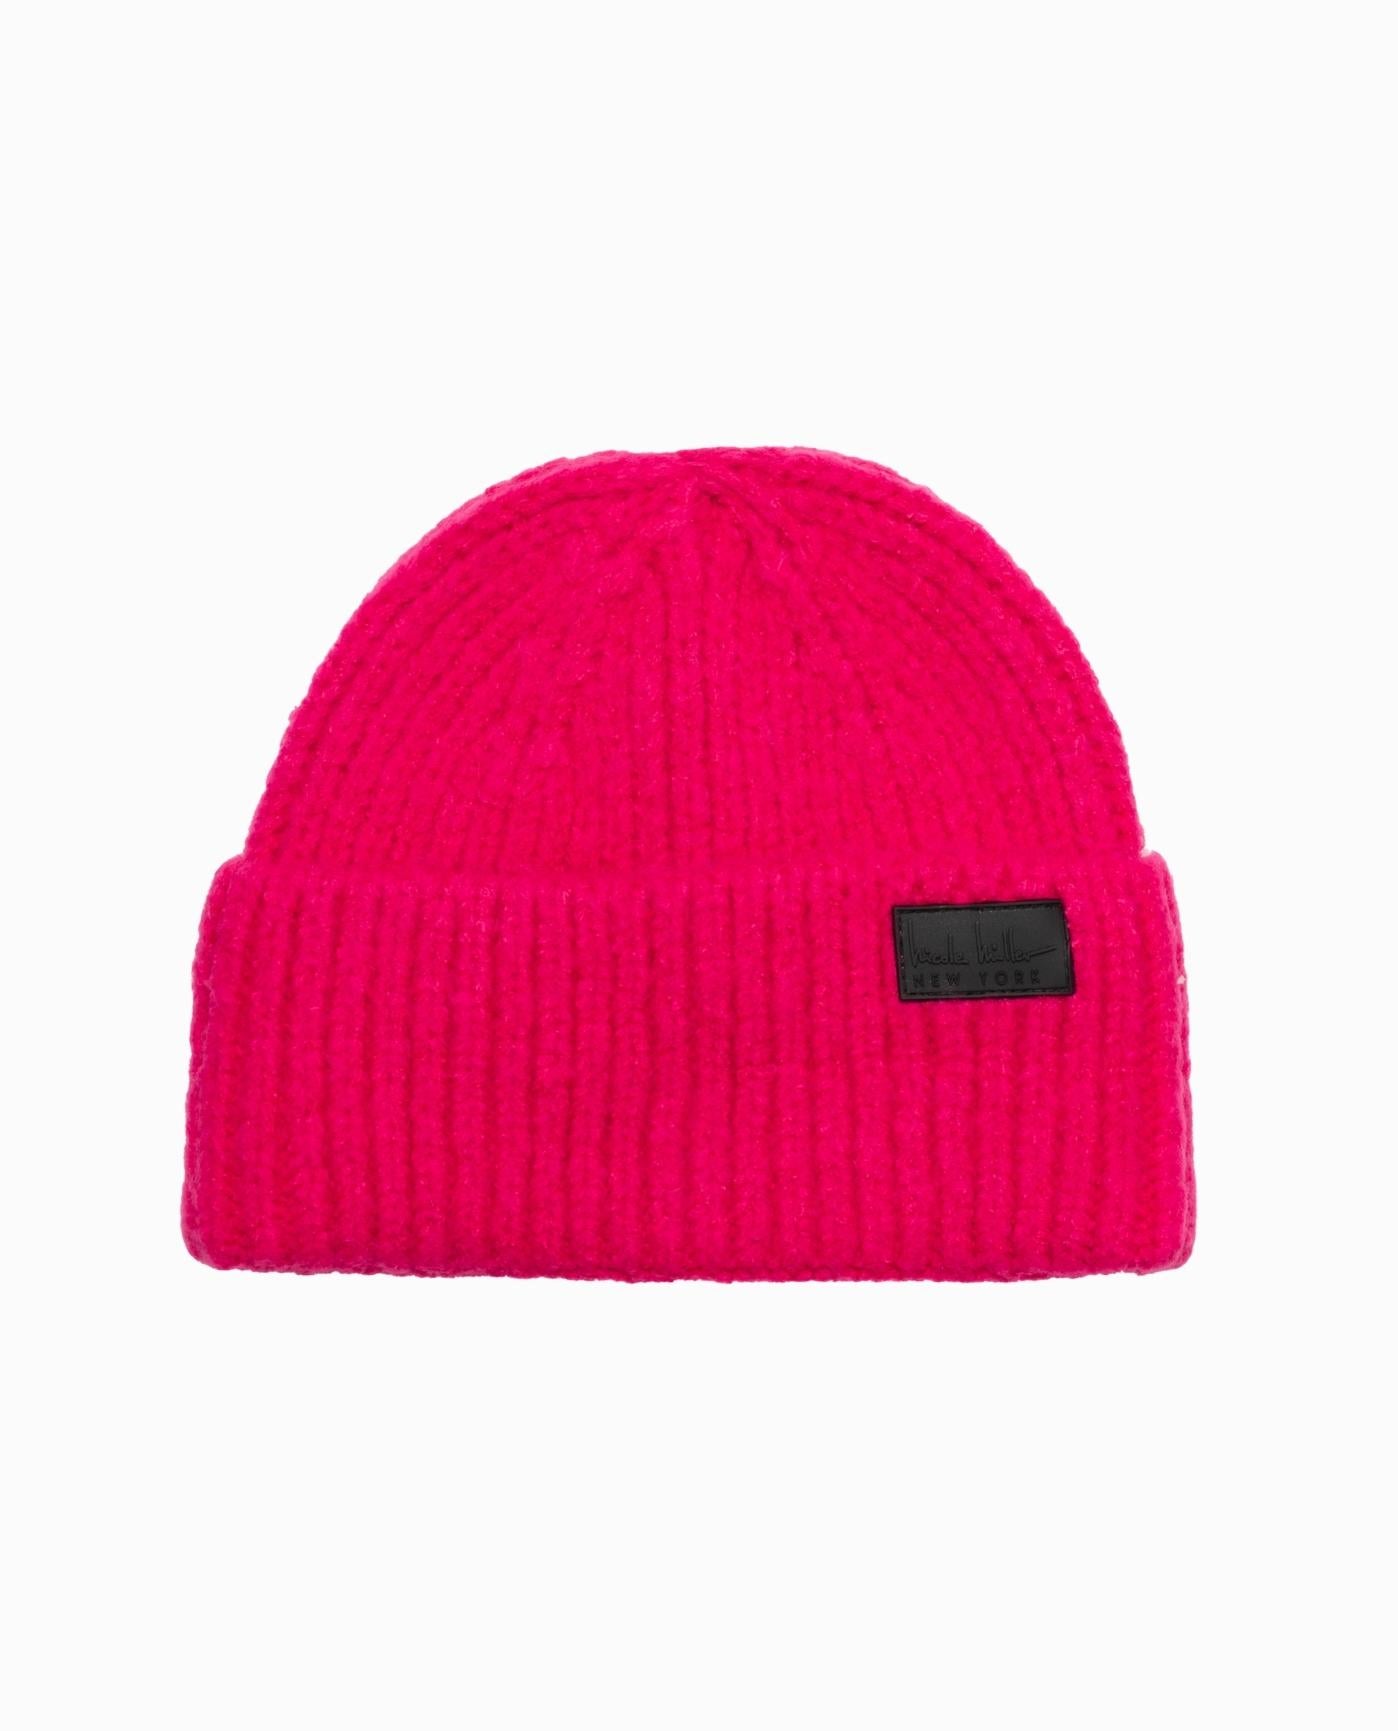 Nicole Miller Wide Rib Fisherman Beanie Os / Pink Accessories Cold Weather Accessories